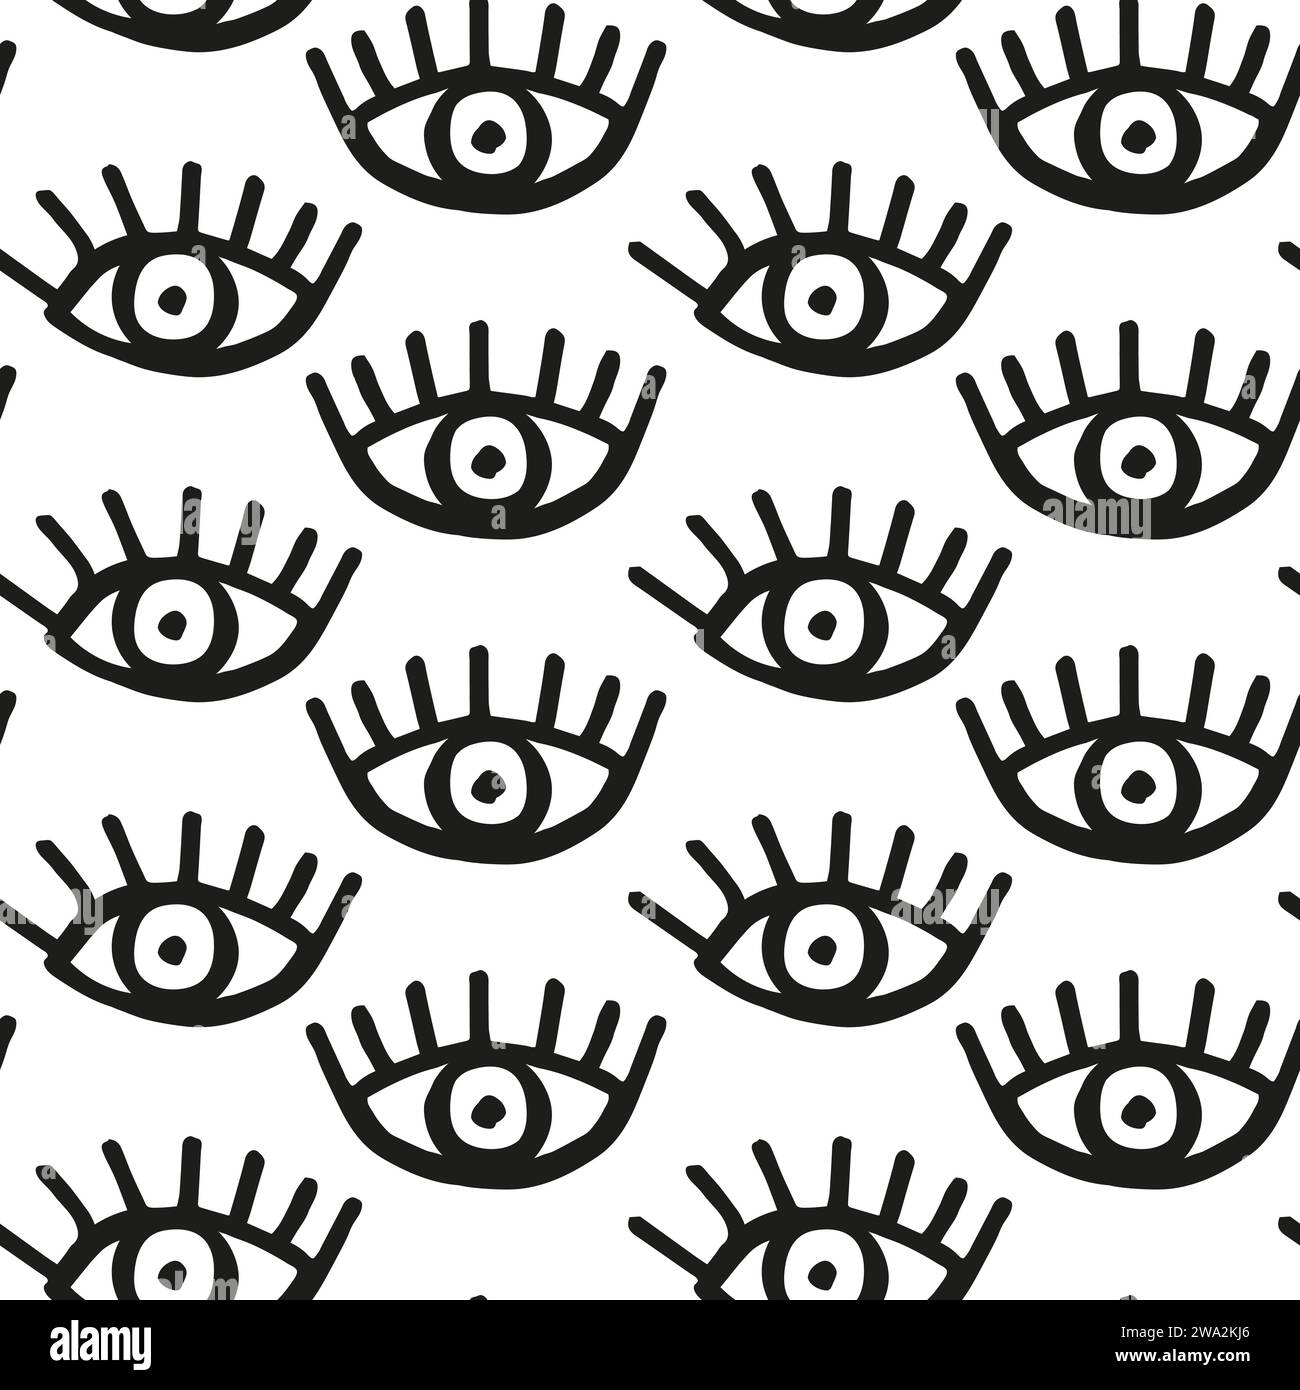 Eye seamless pattern pattern for fabric textile or scrapbook. Hand draw red simple lie art black illustration for surface design. Vector background. Stock Vector